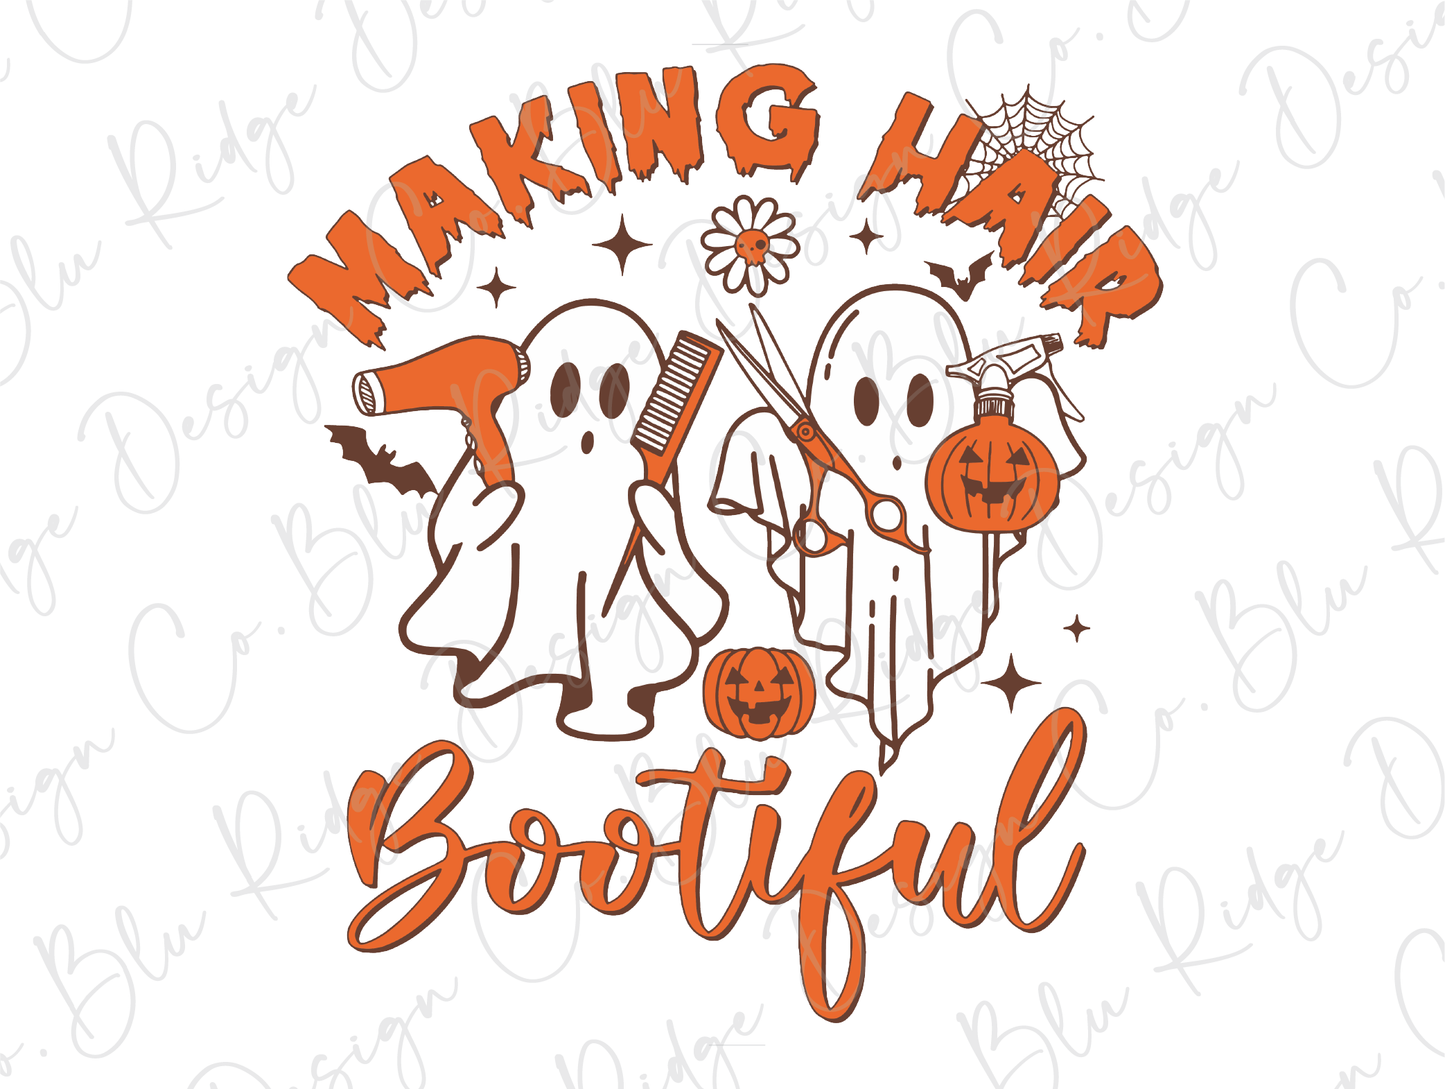 Making Hair Bootiful Halloween Ghost Design Direct To Film (DTF) Transfer